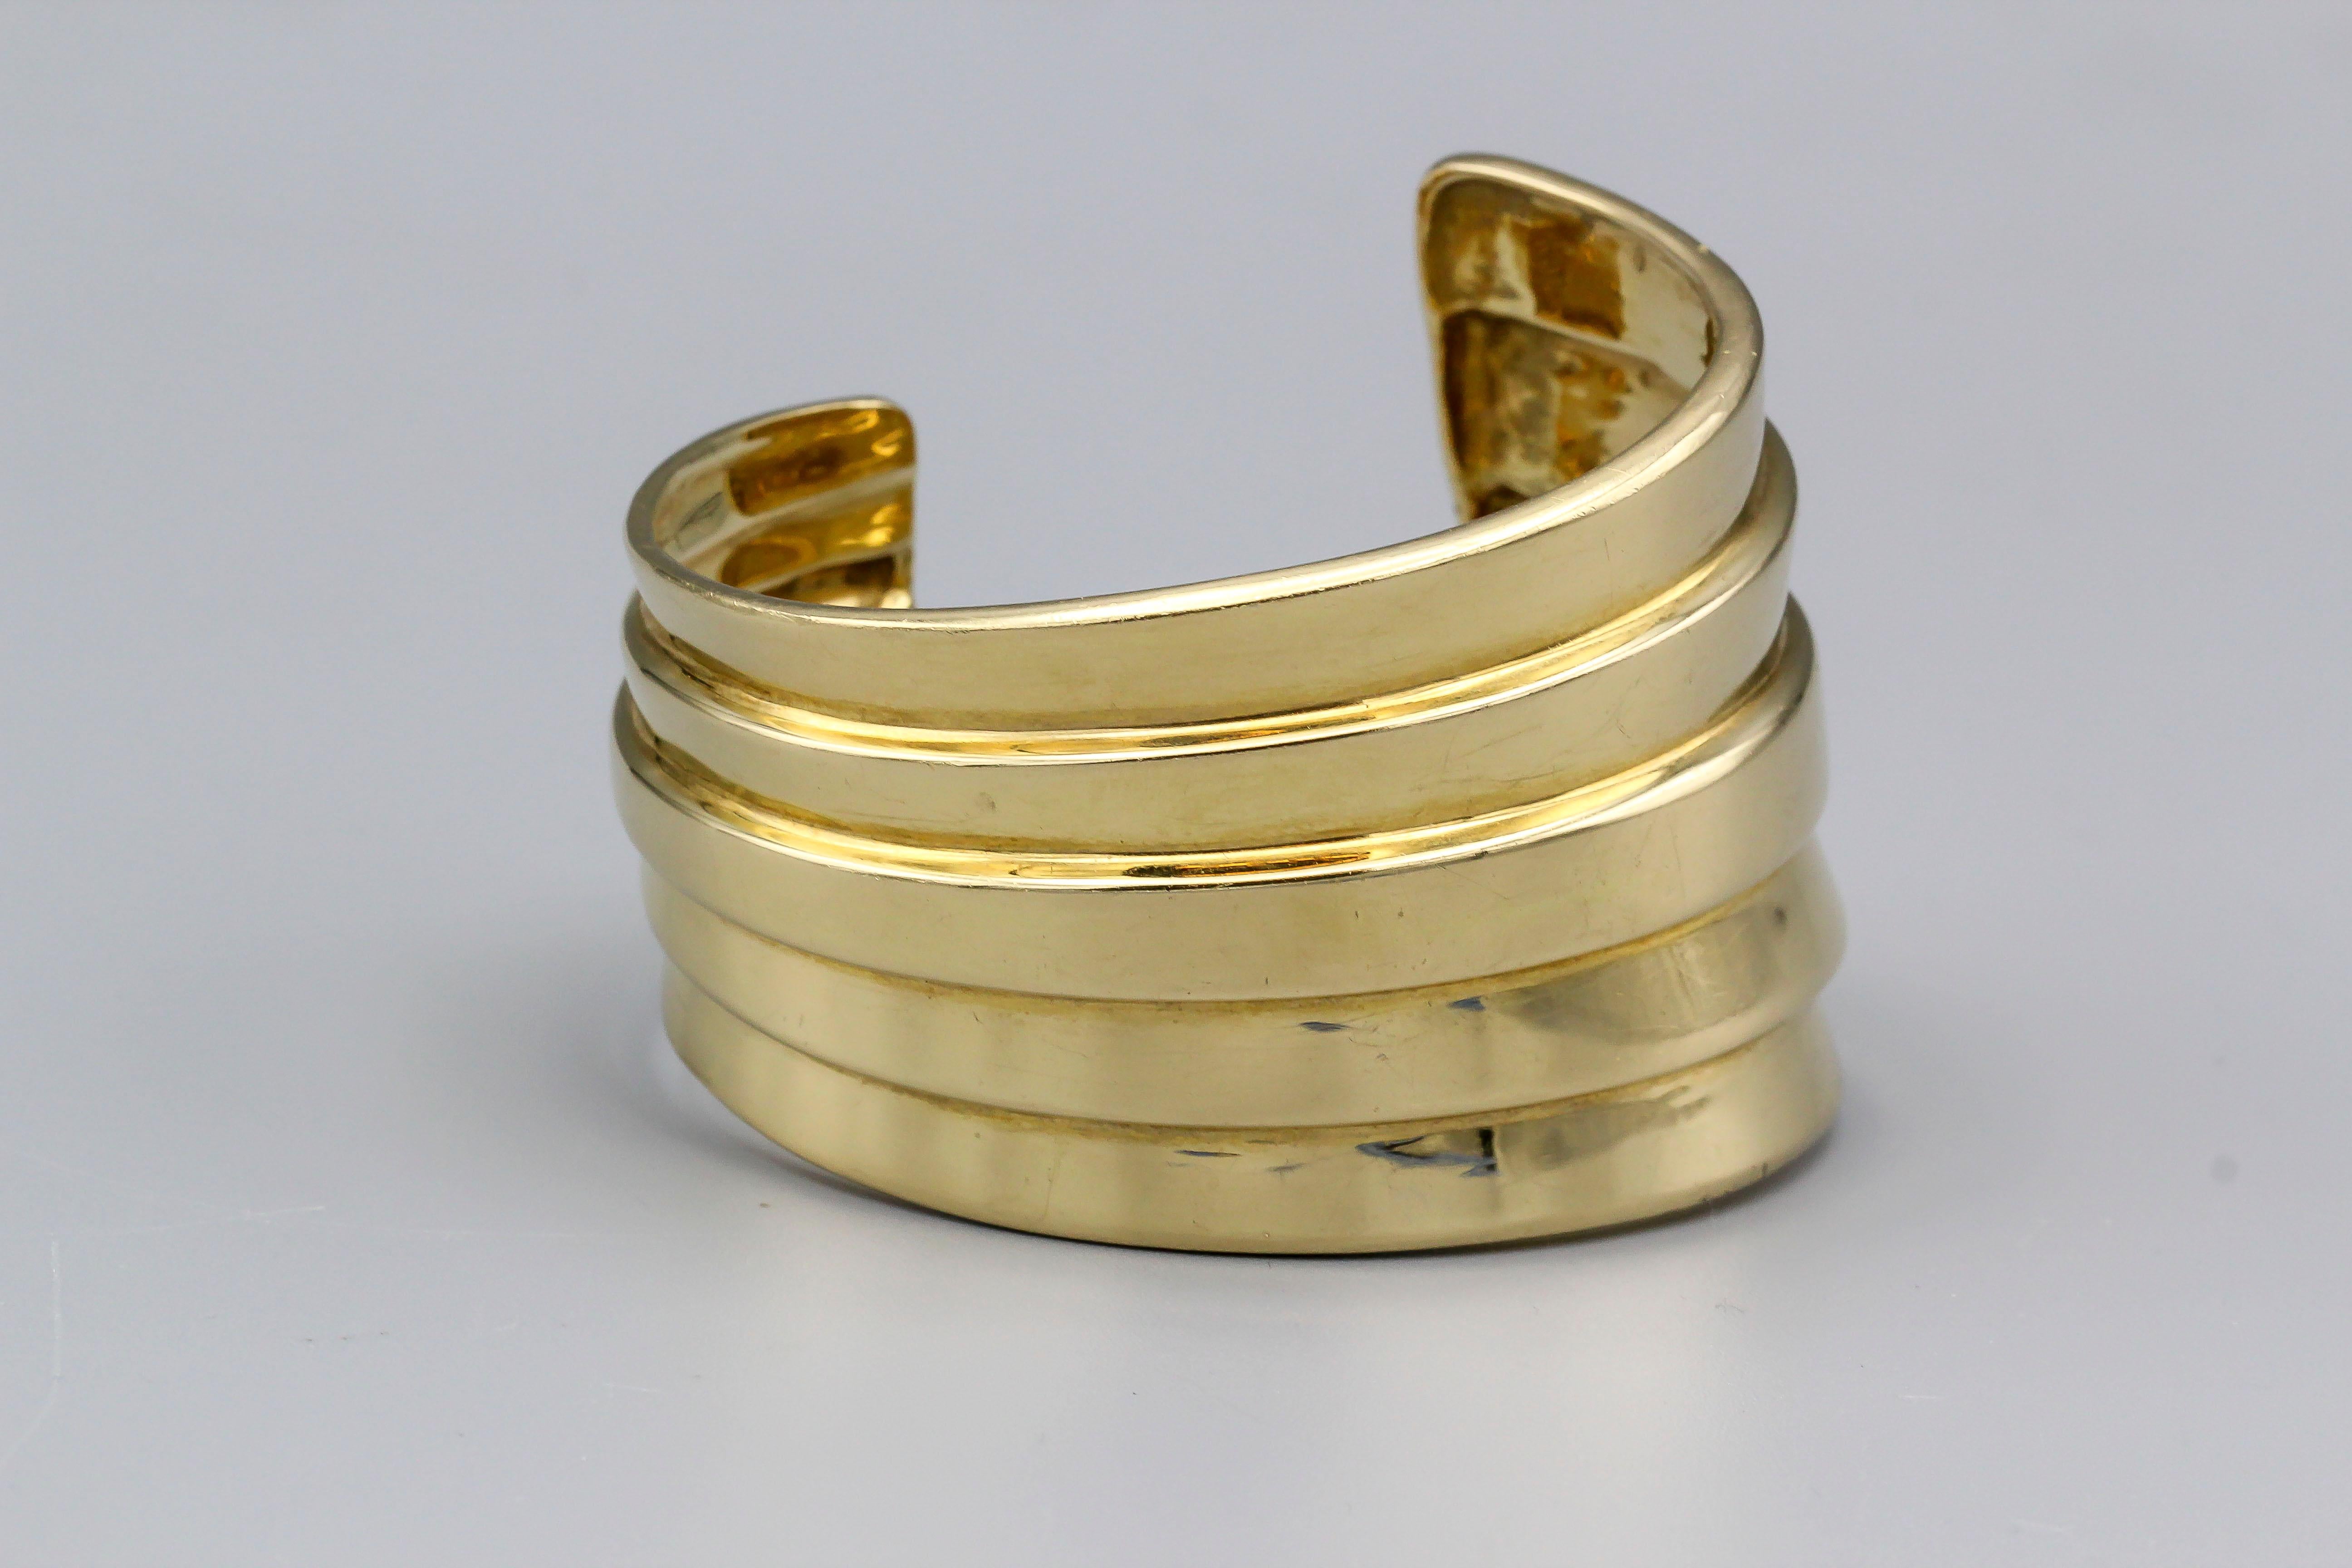 Fine 18k yellow gold cuff of an abstract/modern design.  The cuff bear a (C) and 18k mark, perhaps attributable to Angela Cummings.  Weight over 108 grams and almost 2 inches at its widest point, the cuff certainly offers a strong presence.  Made